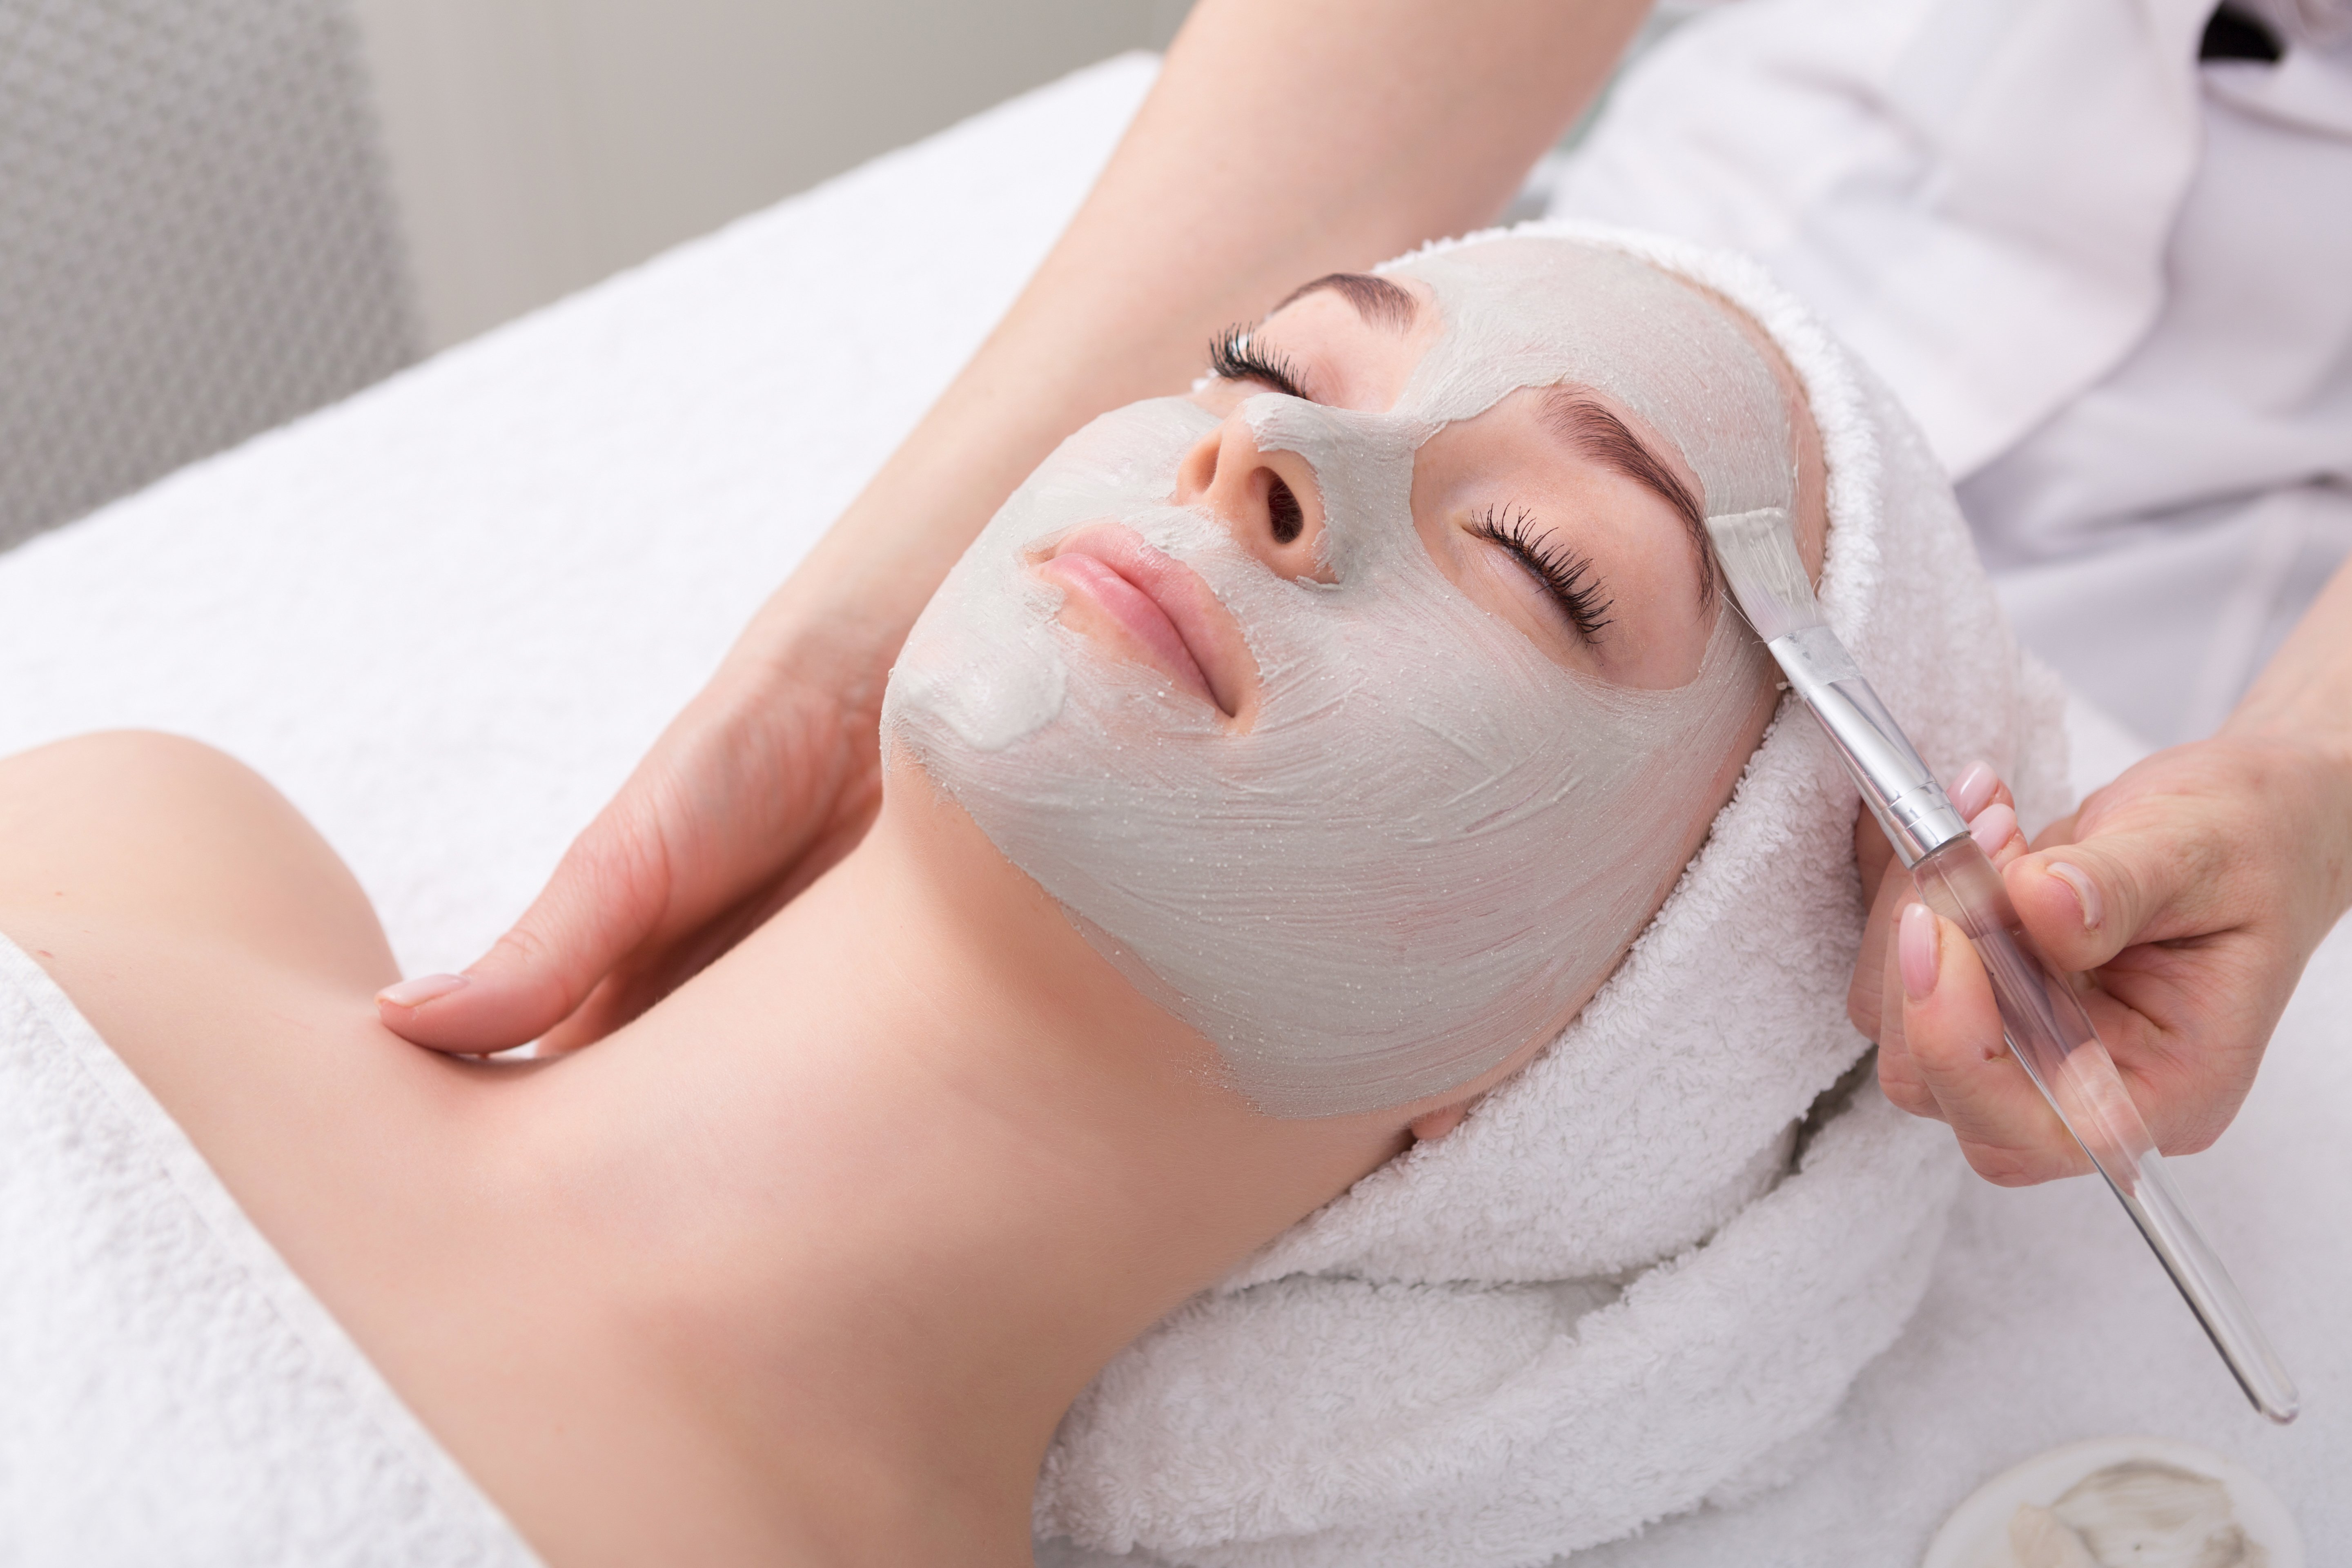 A woman receiving facial mask at the spa | Source: Shutterstock